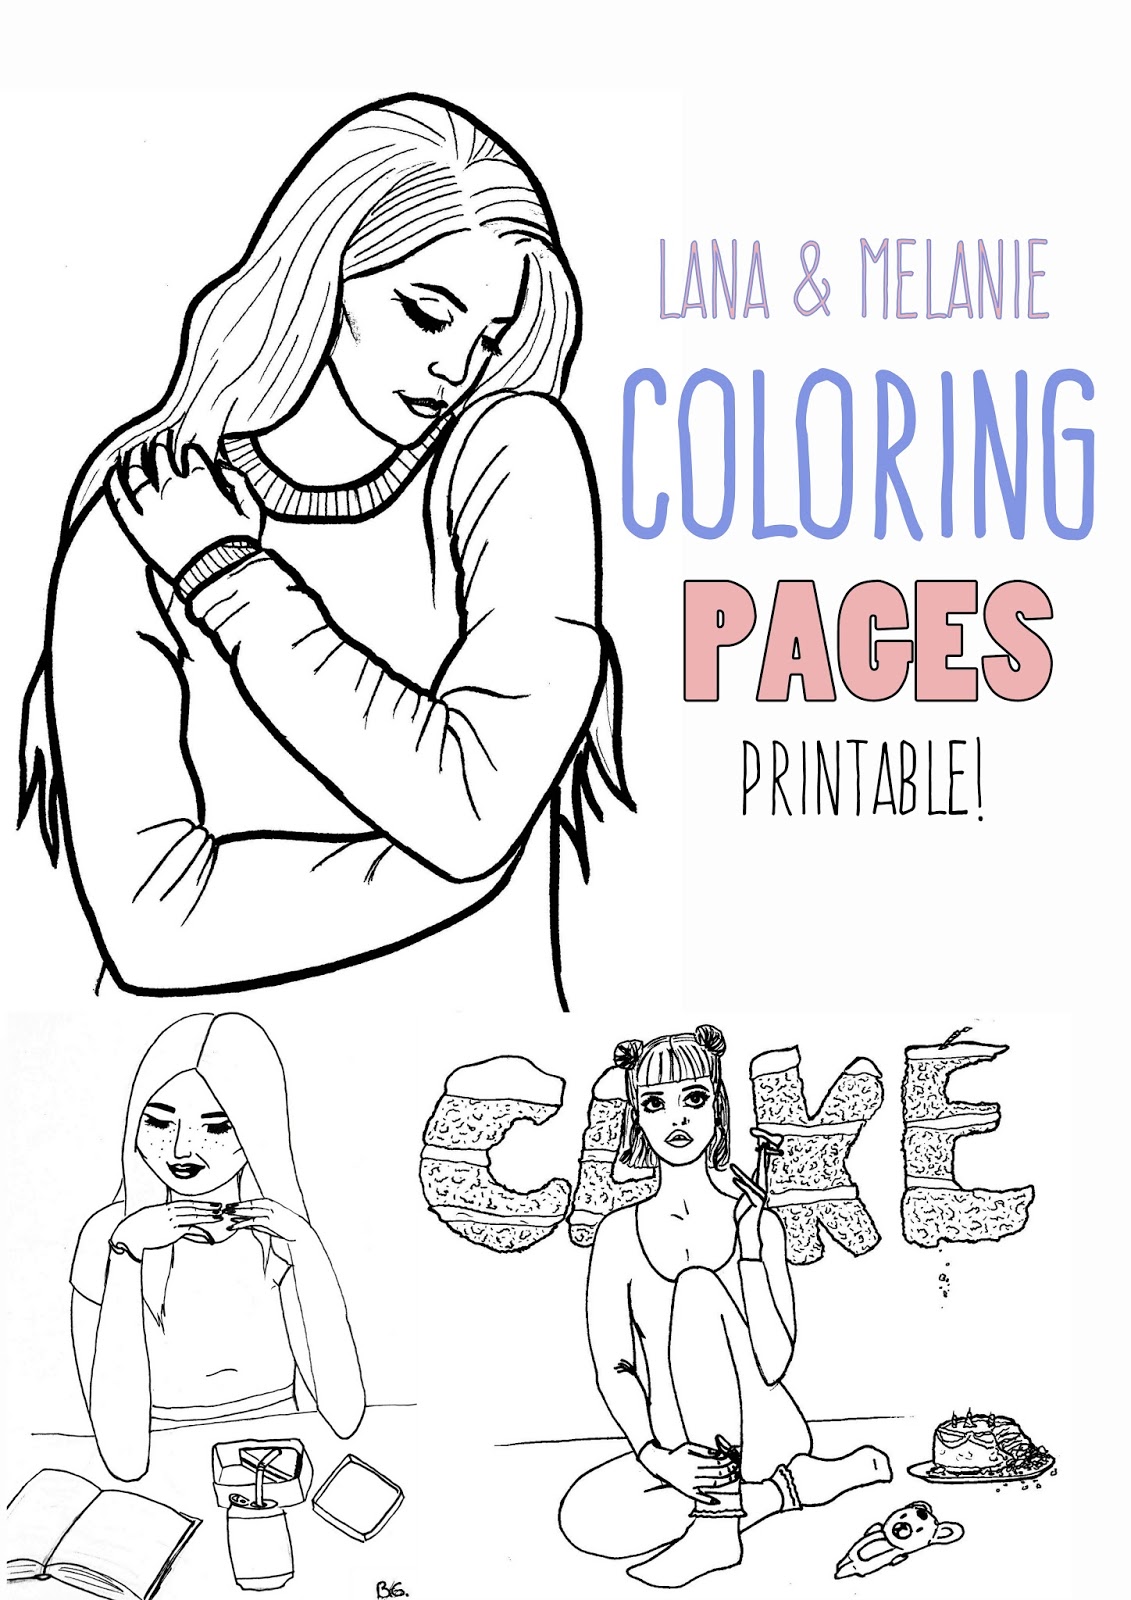 Melanie Martinez and Lana Del Rey coloring pages to print